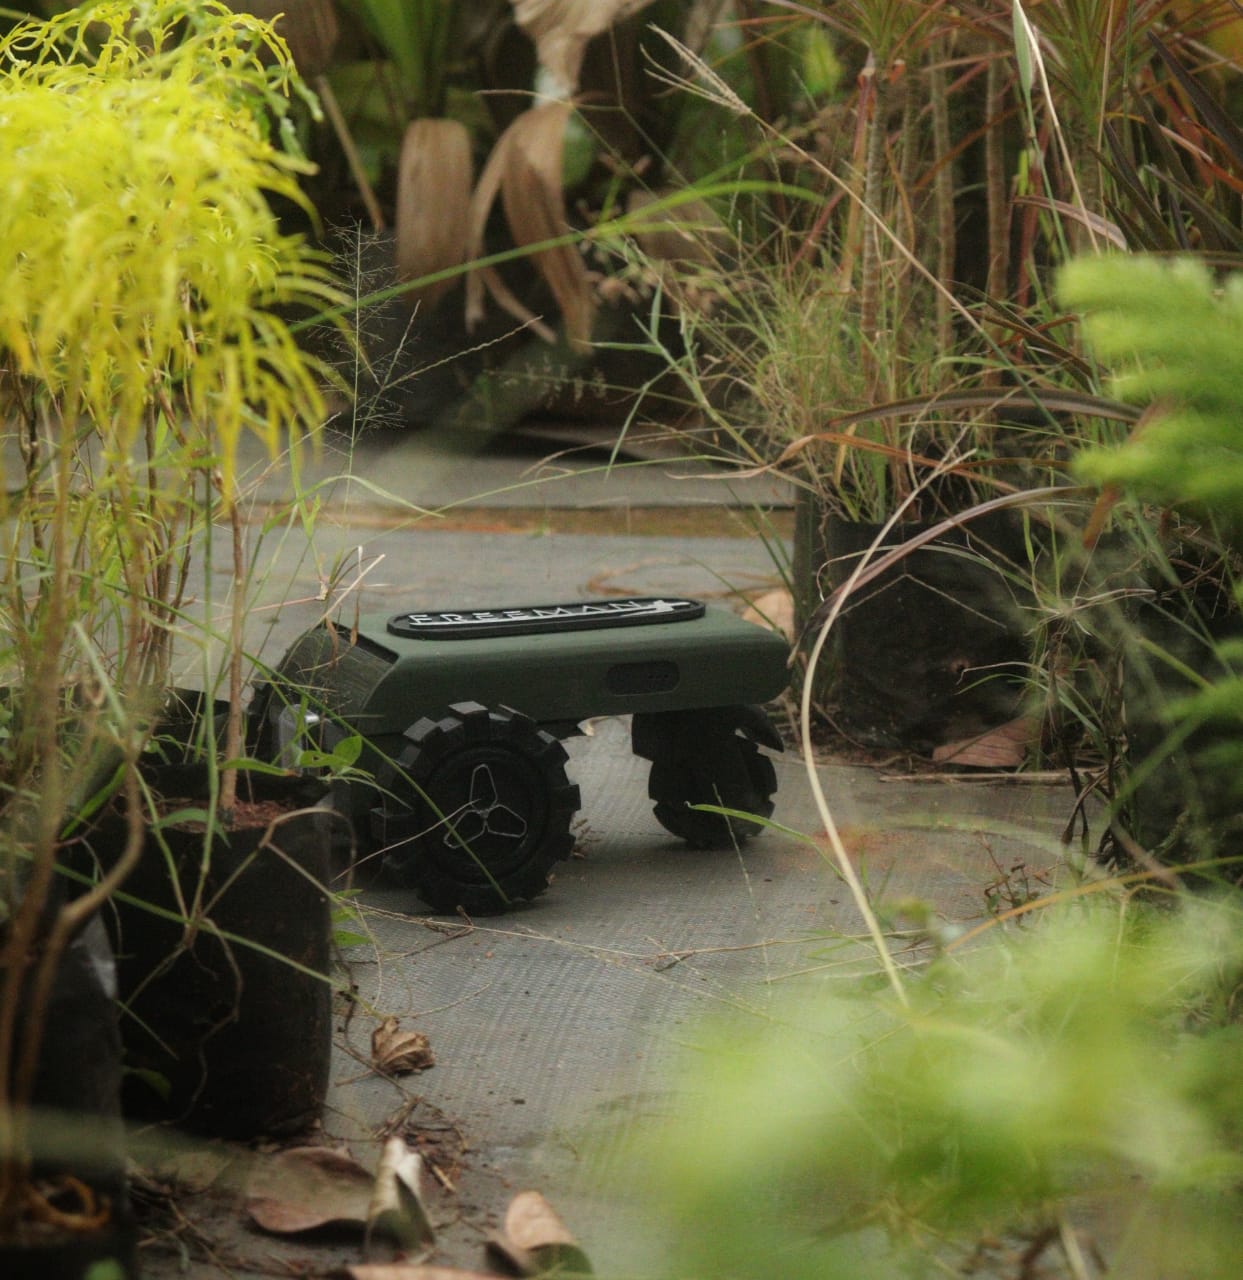 Gardro is a garden assistant robot that helps identify and terminate weeds